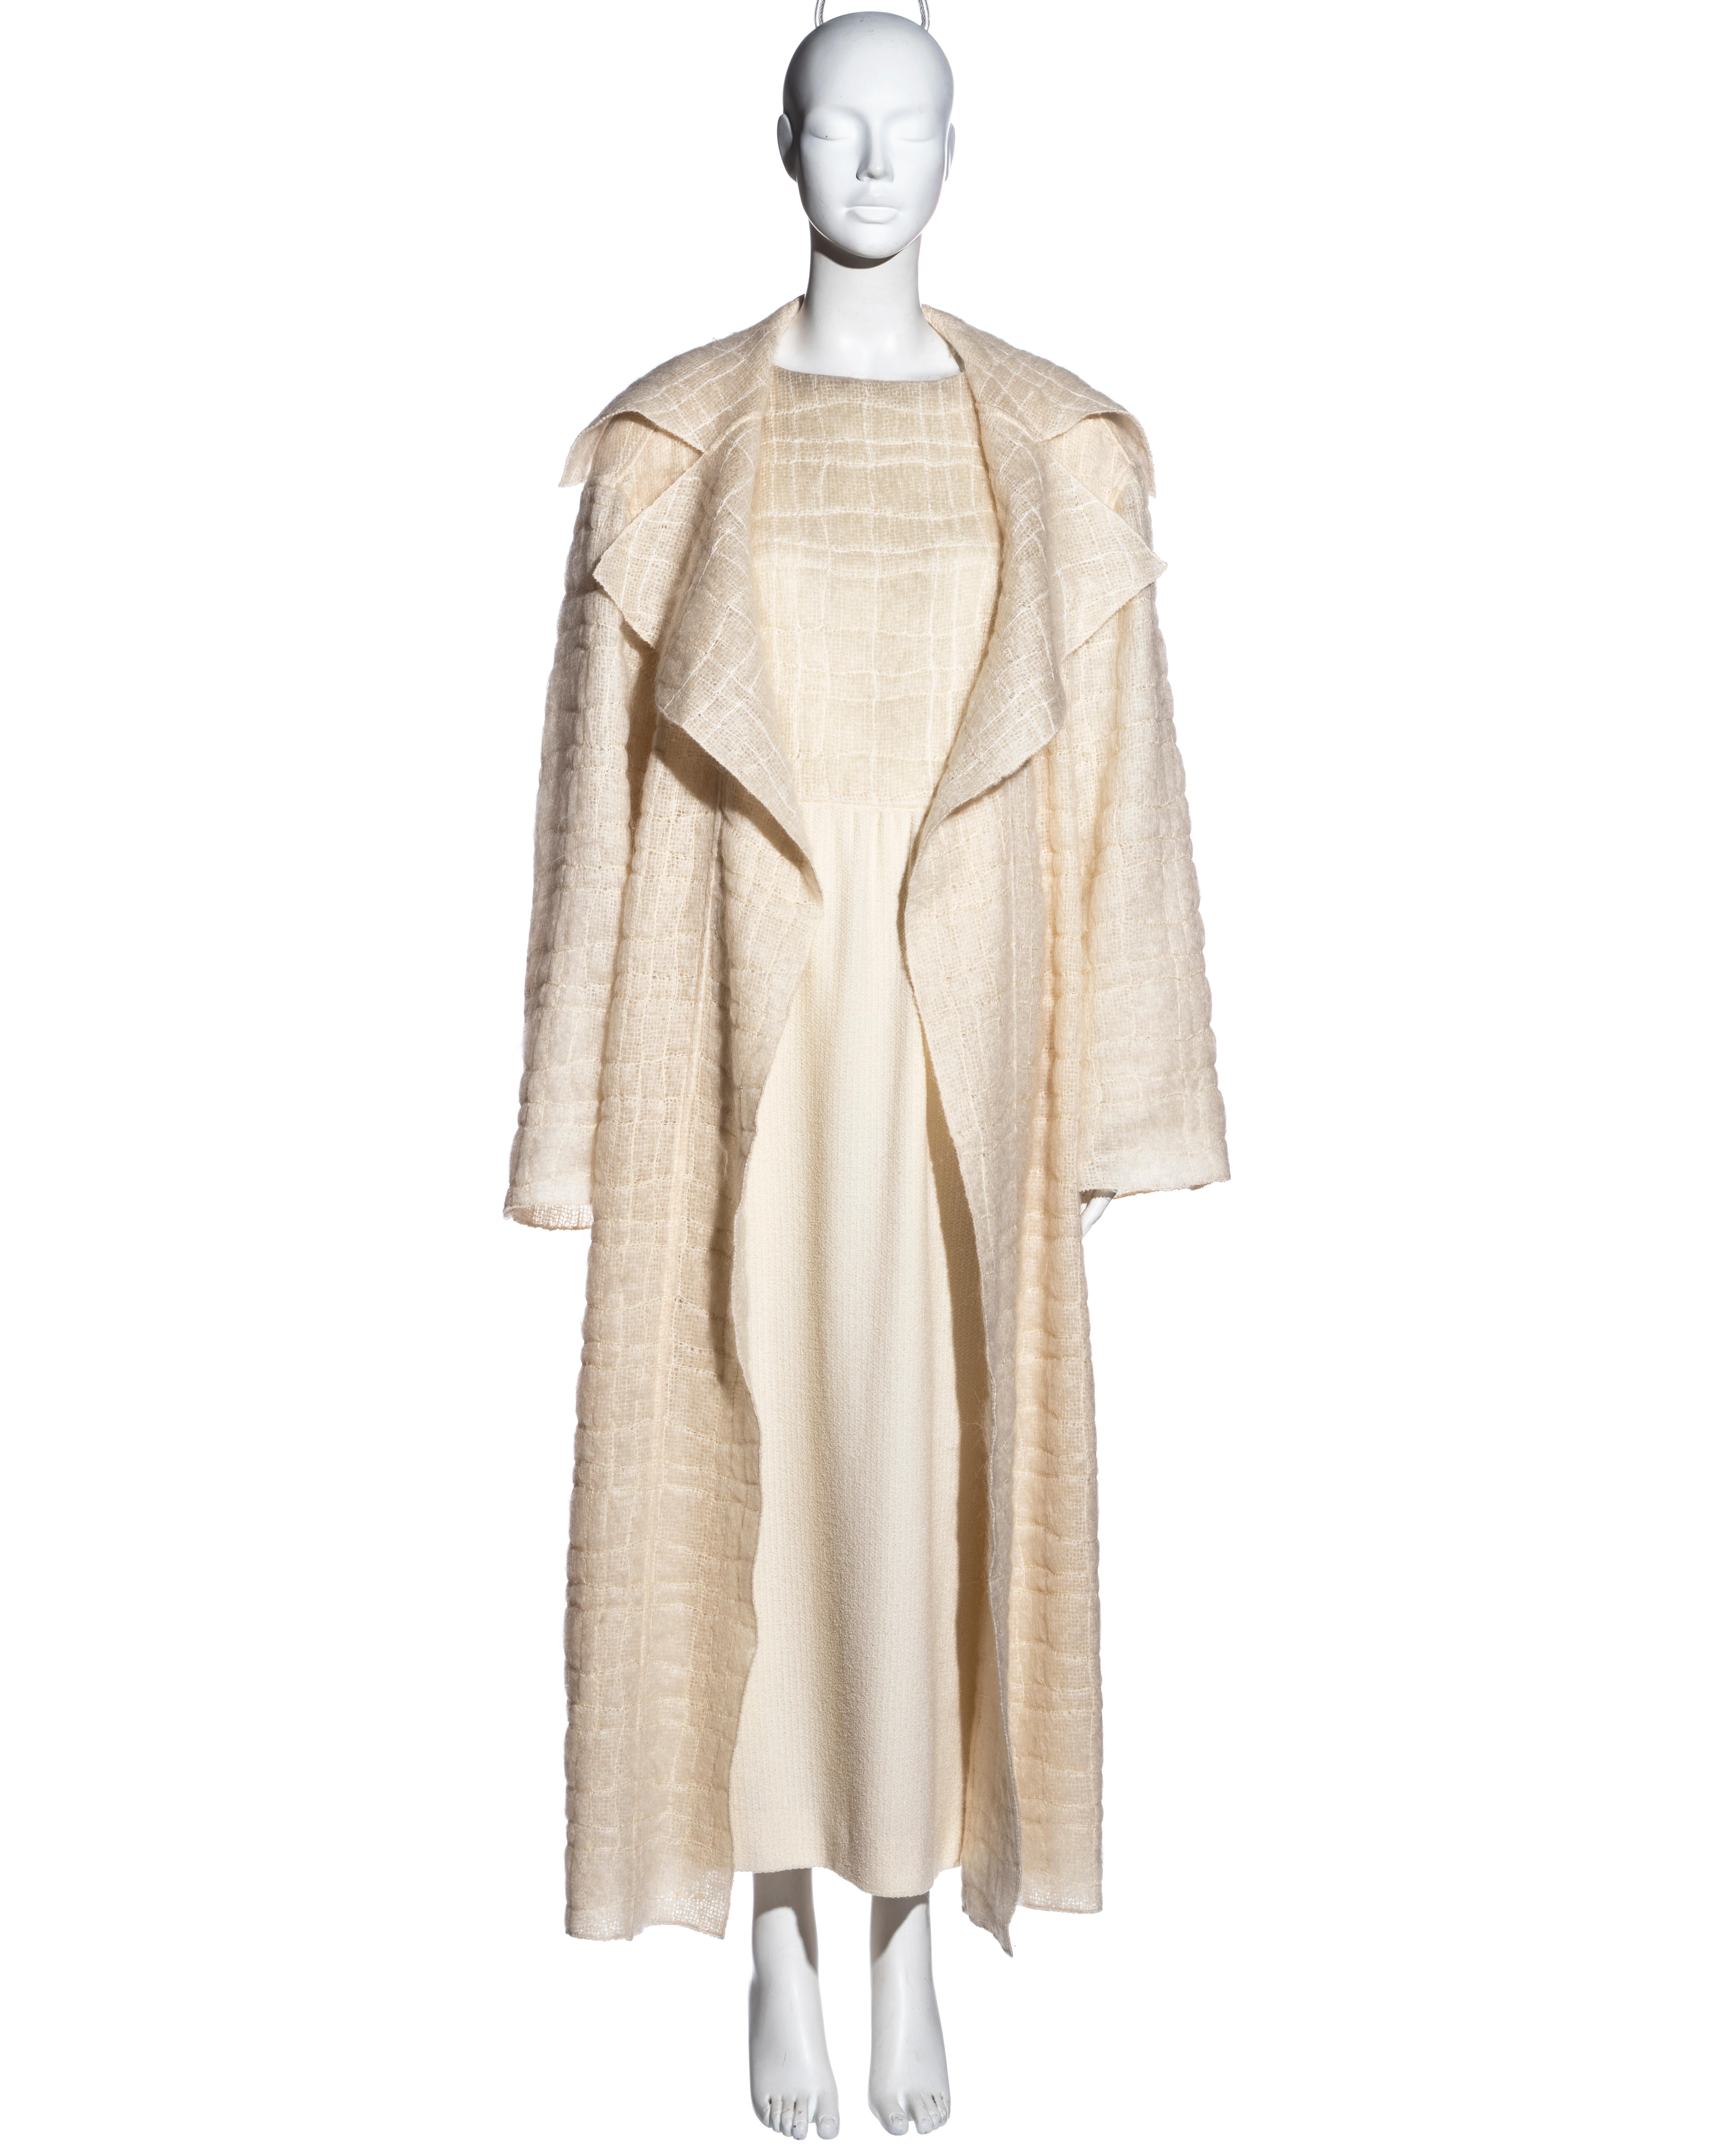 ▪ Chanel cream mohair wool coat and dress ensemble 
▪ Designed by Karl Lagerfeld 
▪ Oversized open-front coat with matching belt 
▪ Large notched lapels 
▪ Built-in shoulder pads 
▪ Matching dress with ankle-length skirt 
▪ Logo button fastenings at